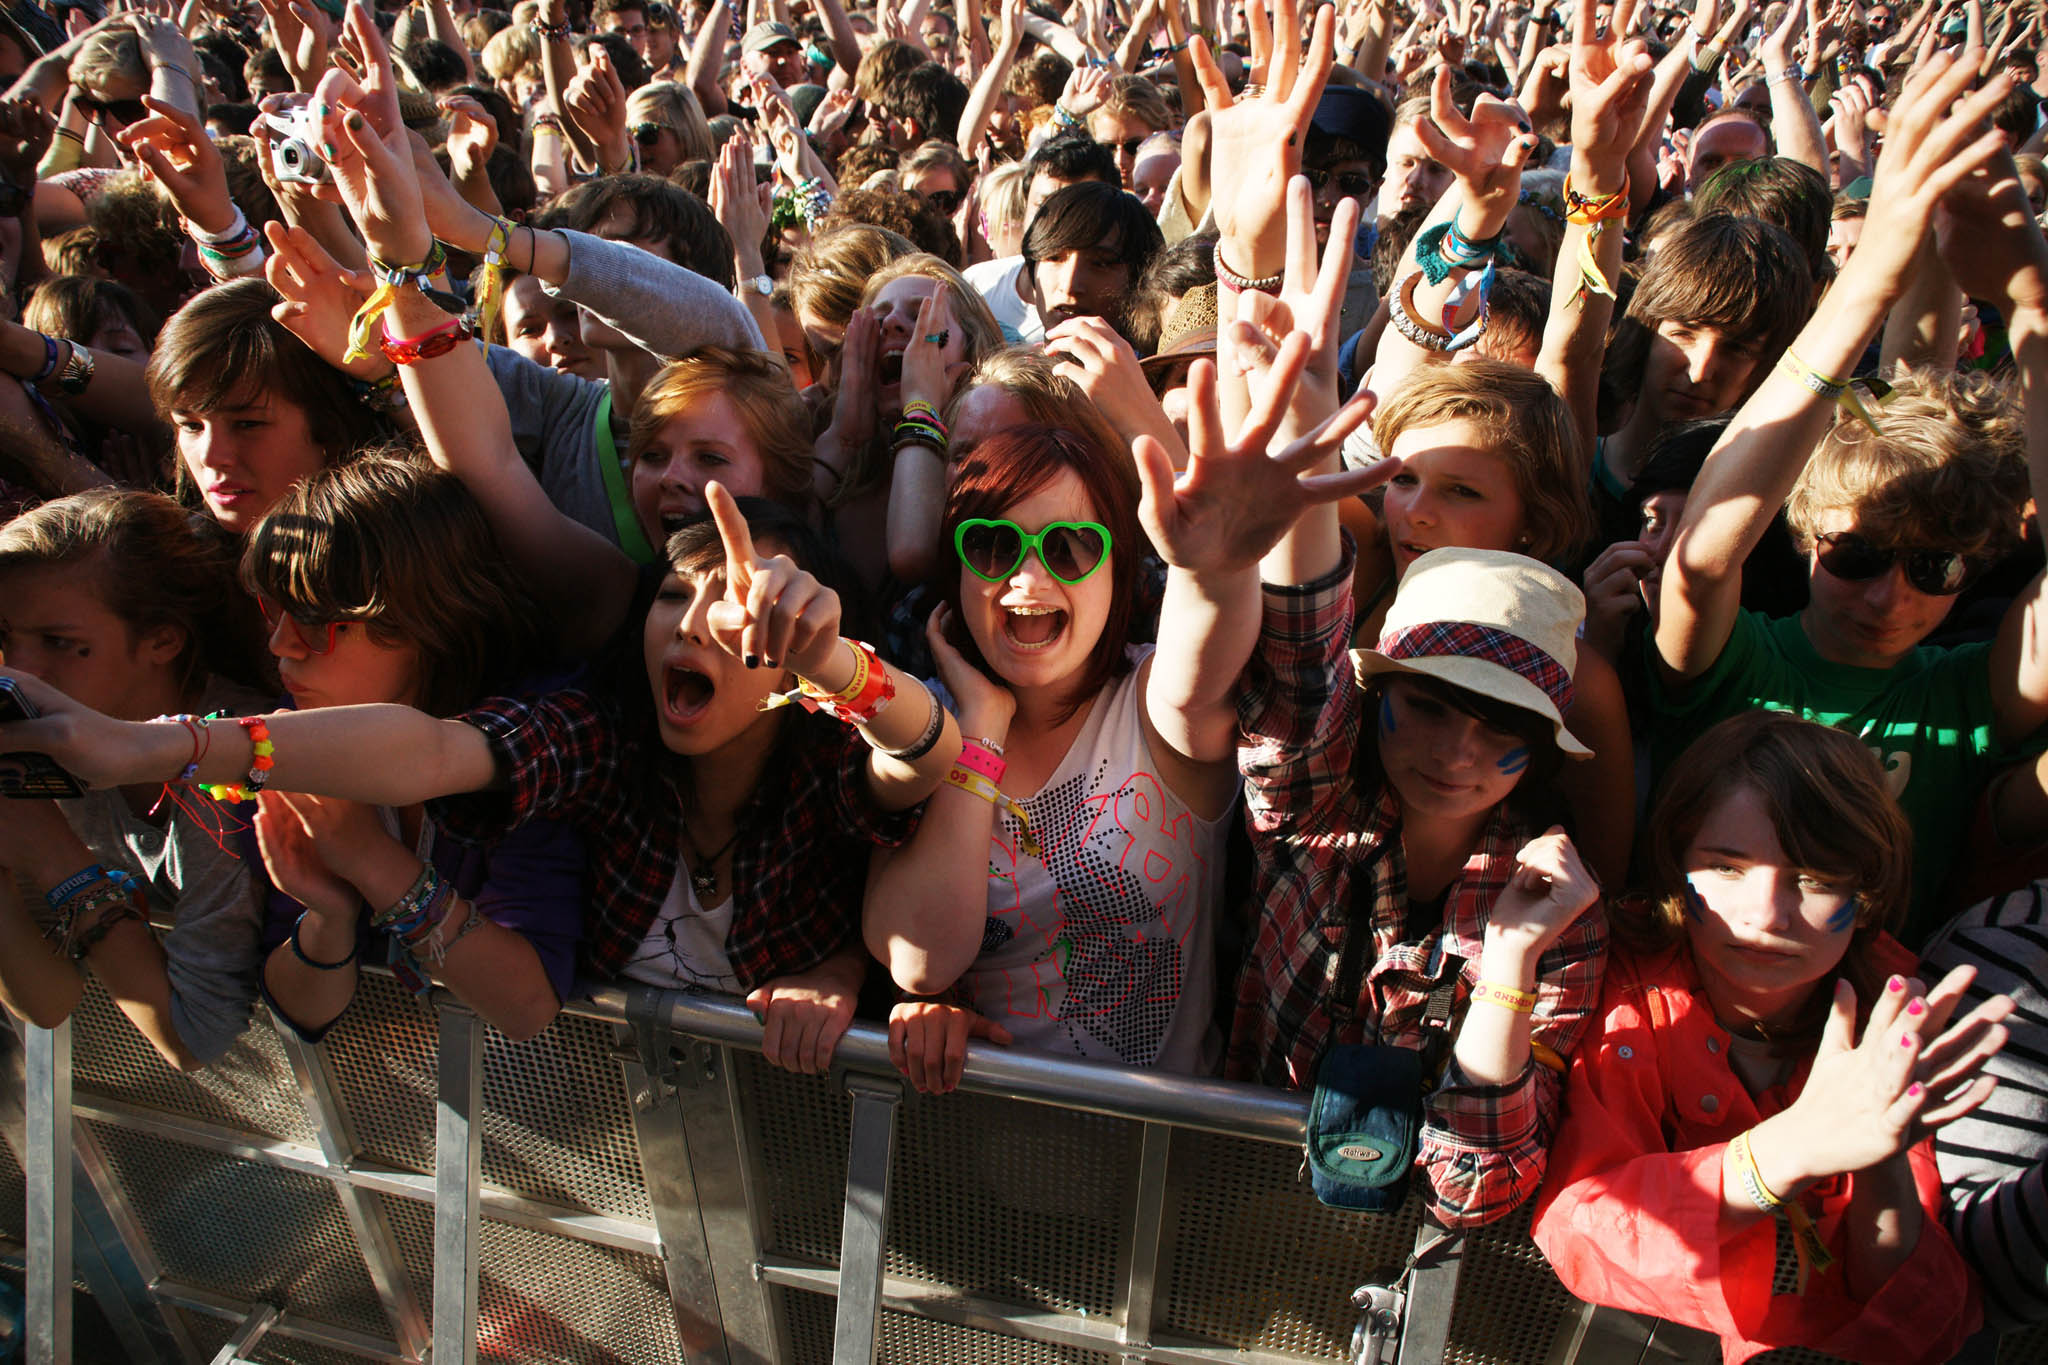 Fans watch acts perform live at Latitude Festival